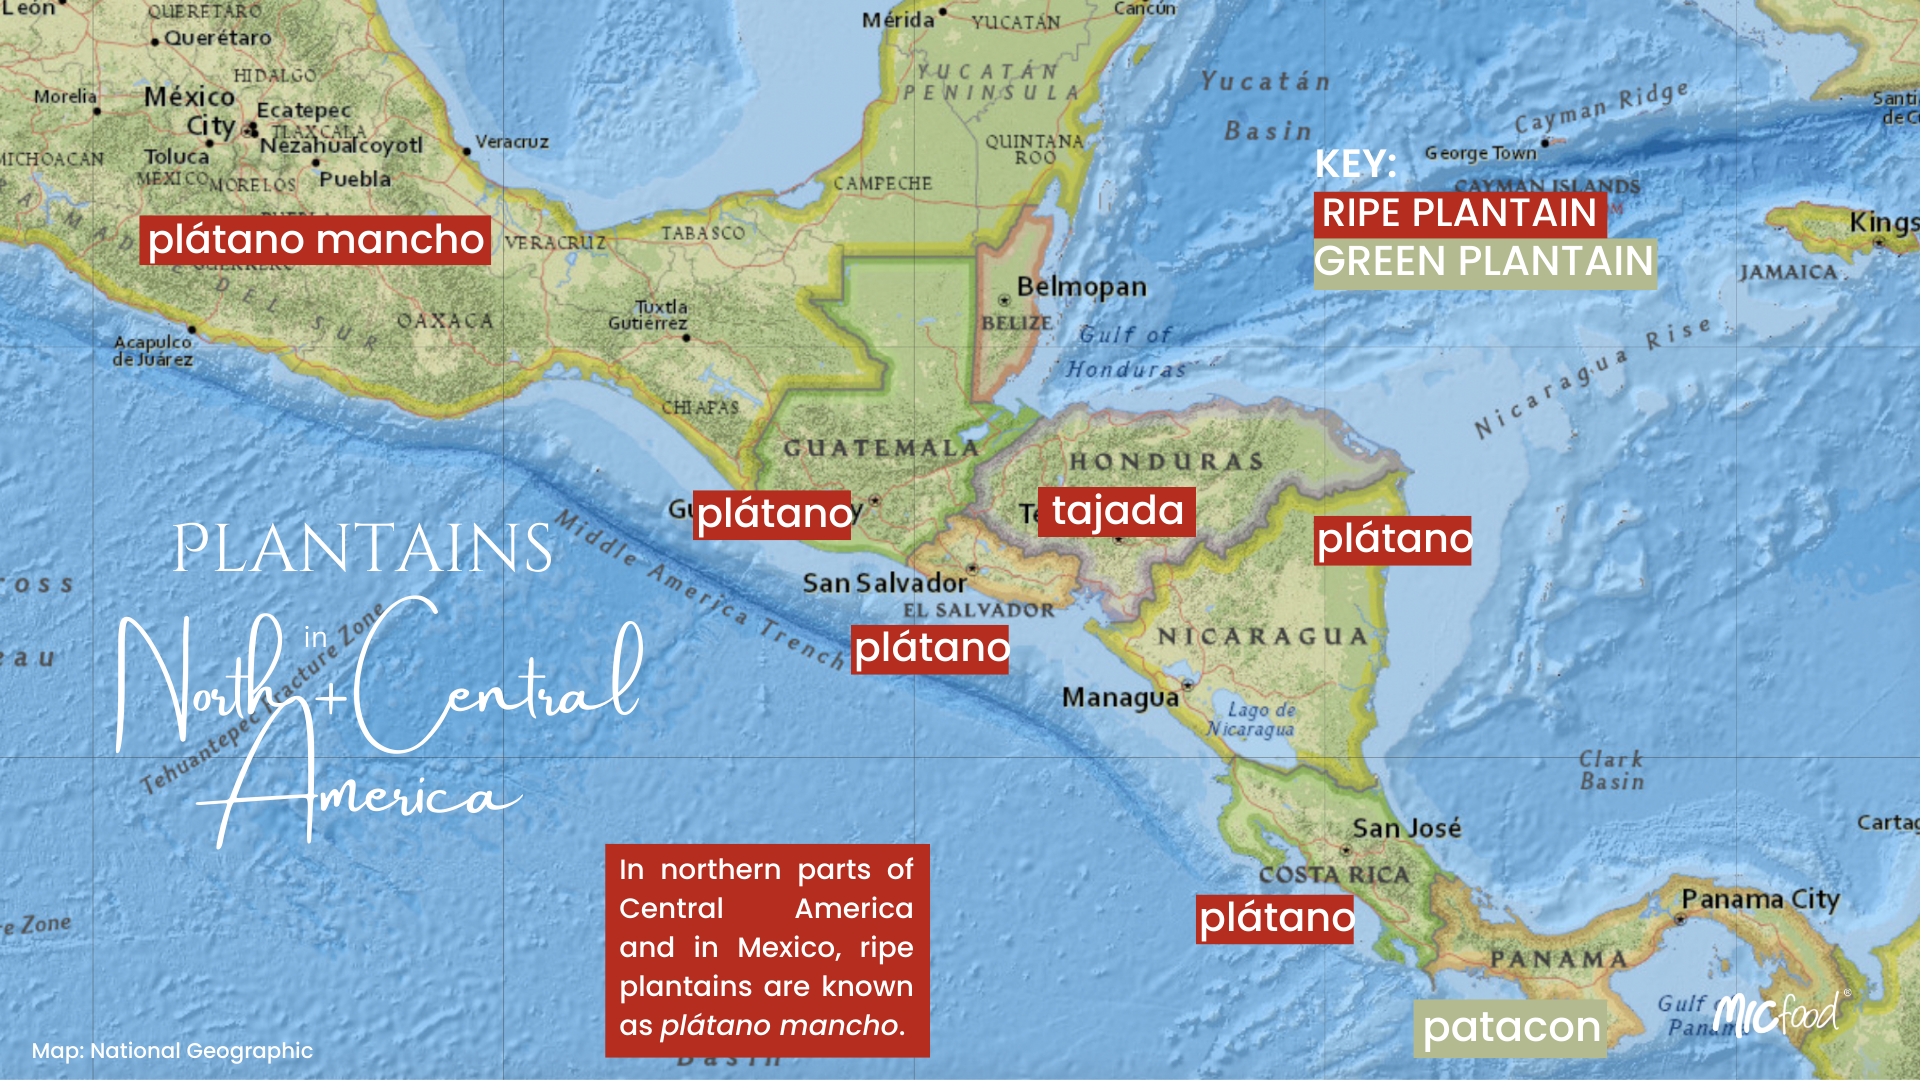 Plantains in North & Central America Graphic